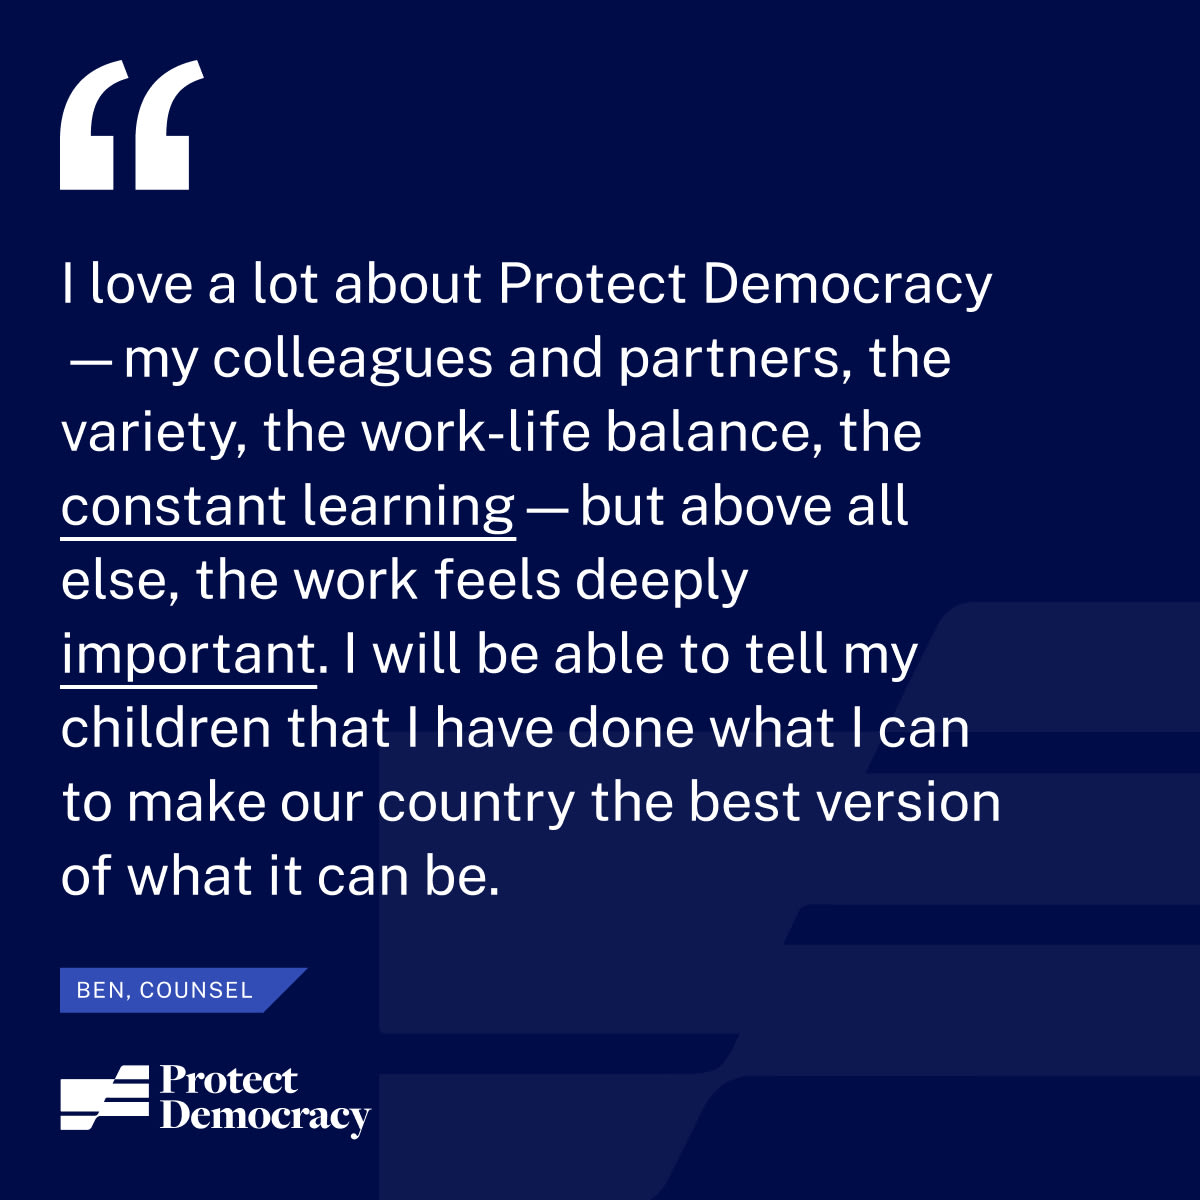 “I love a lot about Protect Democracy—my colleagues and partners, the variety, the work-life balance, the constant learning—but above all else, the work feels deeply important. I will be able to tell my children that I have done what I can to try to make our country the best version of what it can be.” – Ben, Counsel